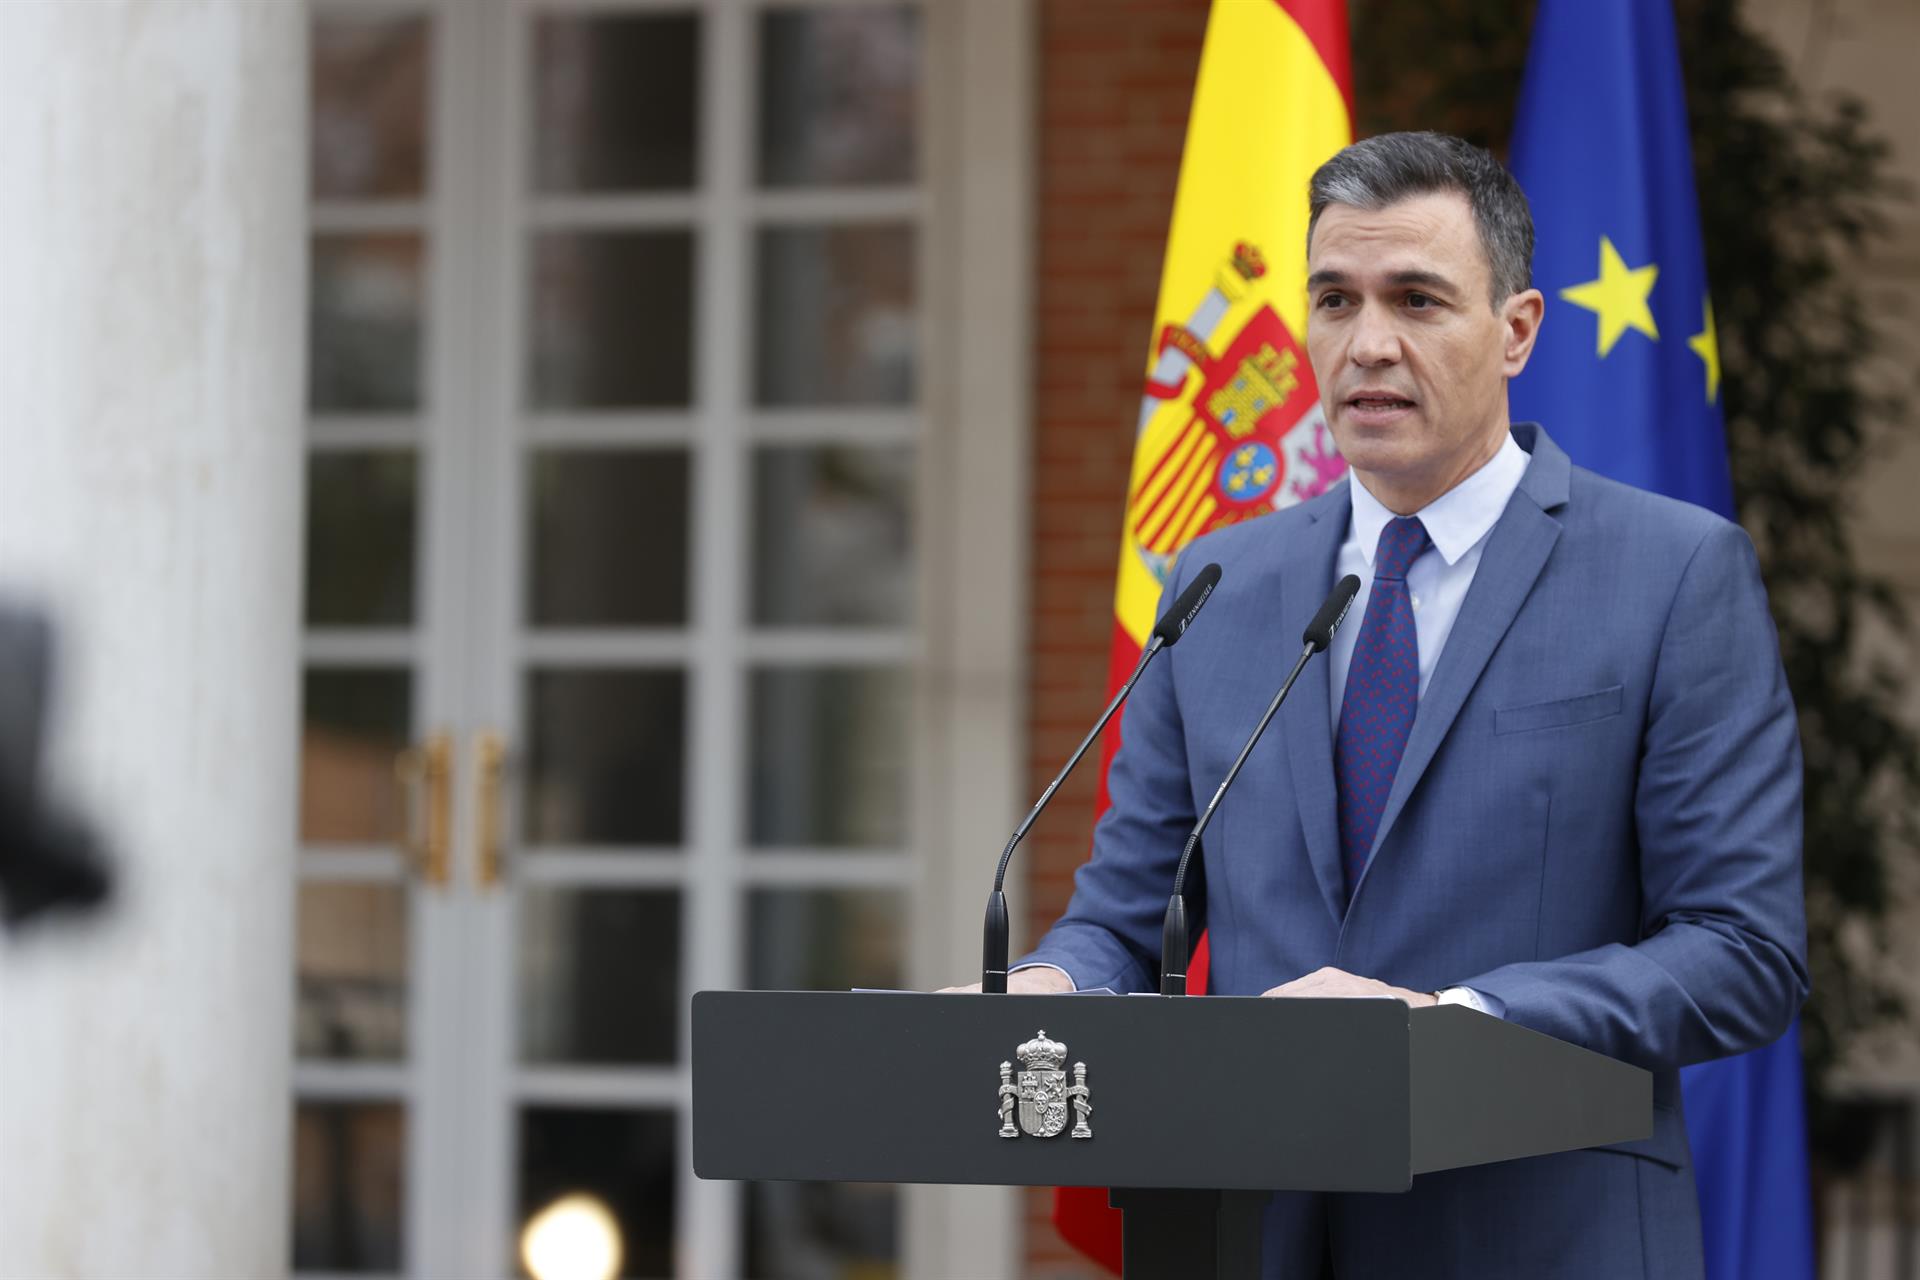 Spanish PM Pedro Sánchez calls on the EU to "come to the aid of" Ukraine